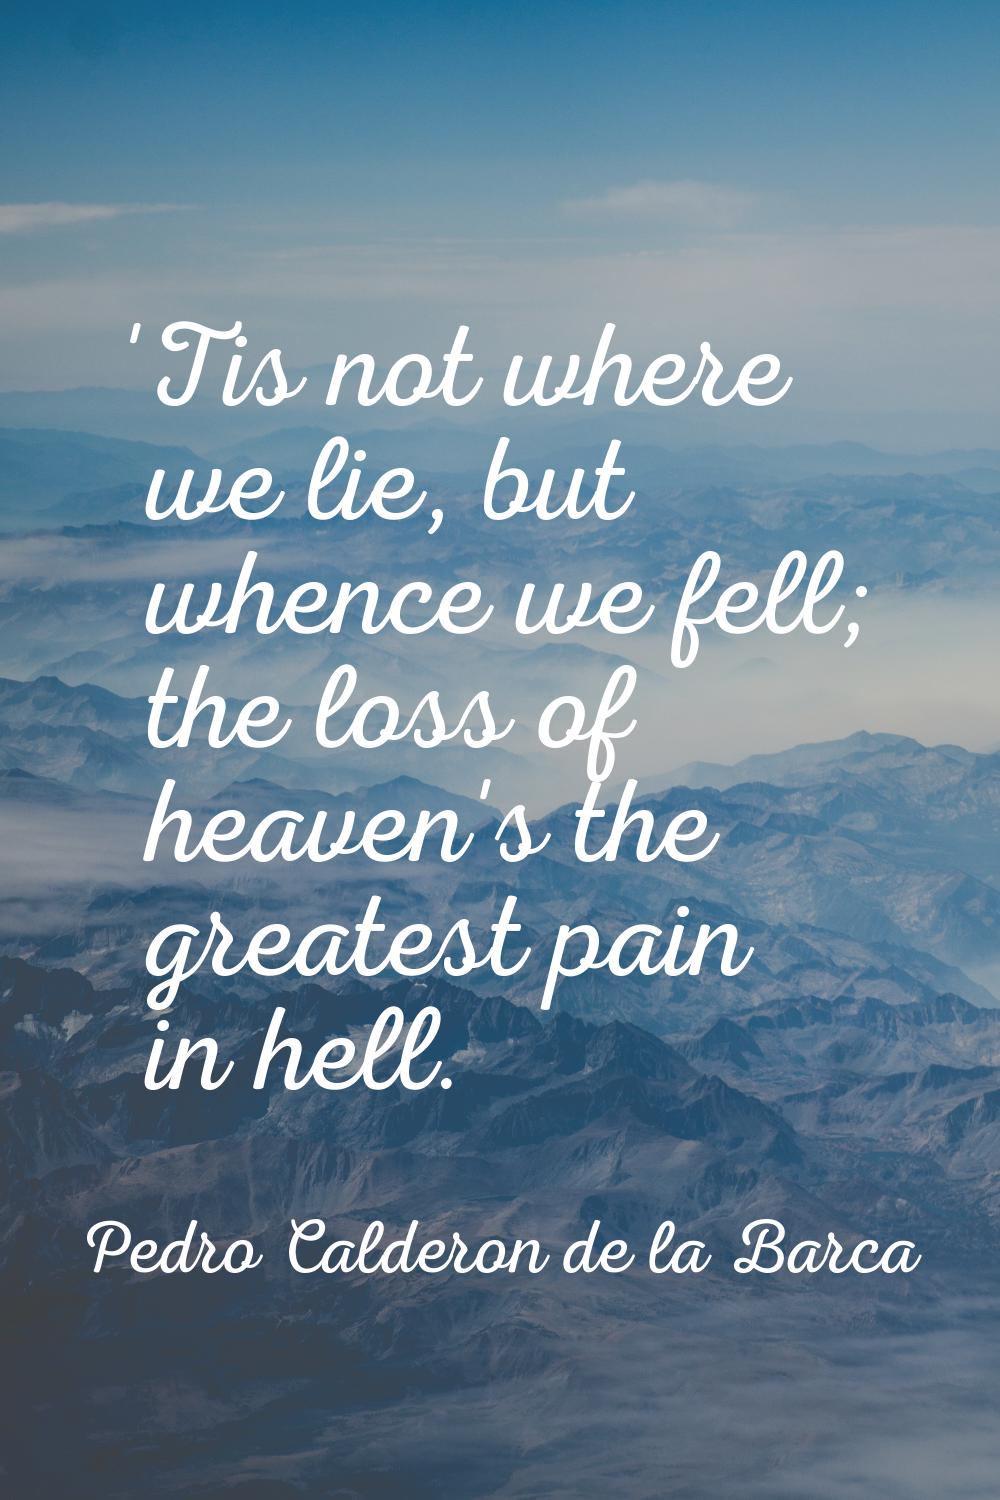 'Tis not where we lie, but whence we fell; the loss of heaven's the greatest pain in hell.